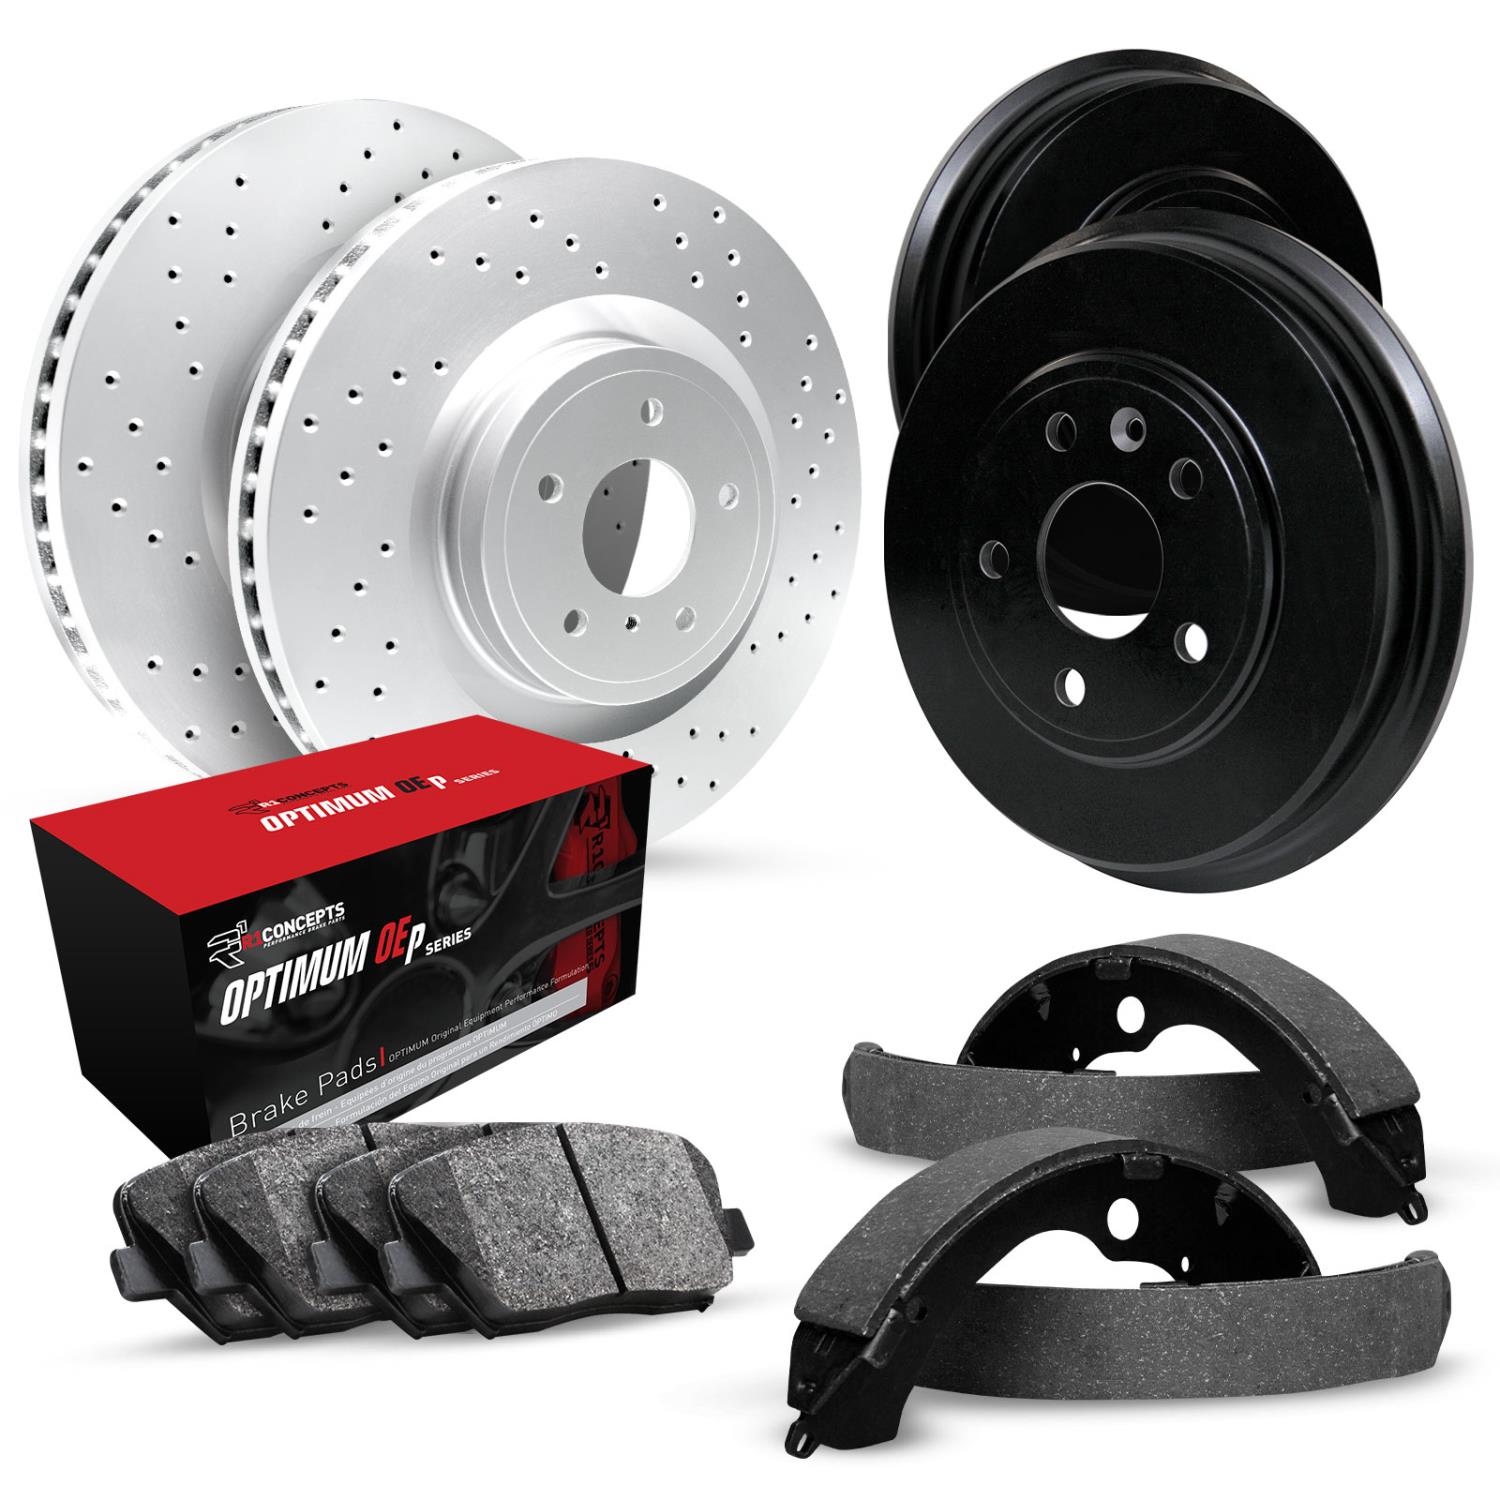 GEO-Carbon Drilled Brake Rotor & Drum Set w/Optimum OE Pads & Shoes, 1971-1982 GM, Position: Front & Rear